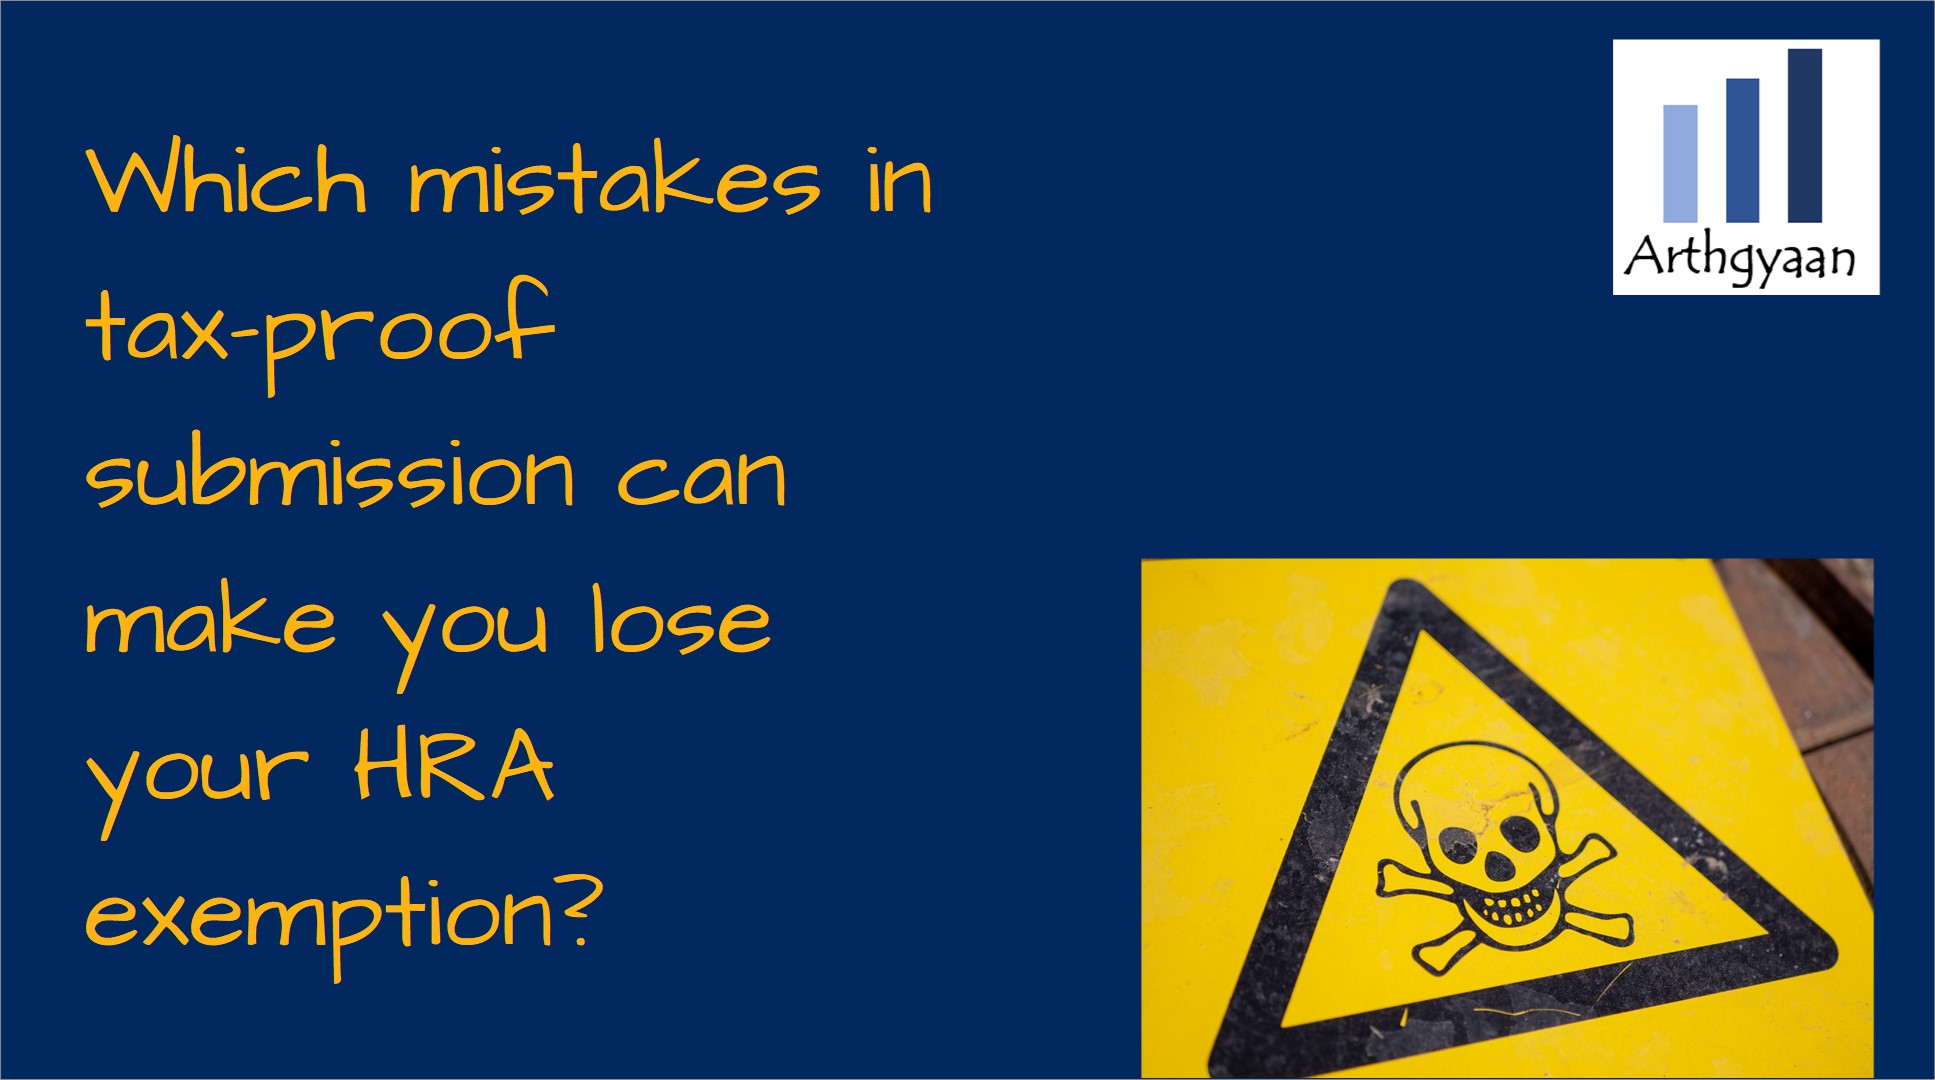 Which mistakes in tax-proof submission that can make you lose your HRA exemption?